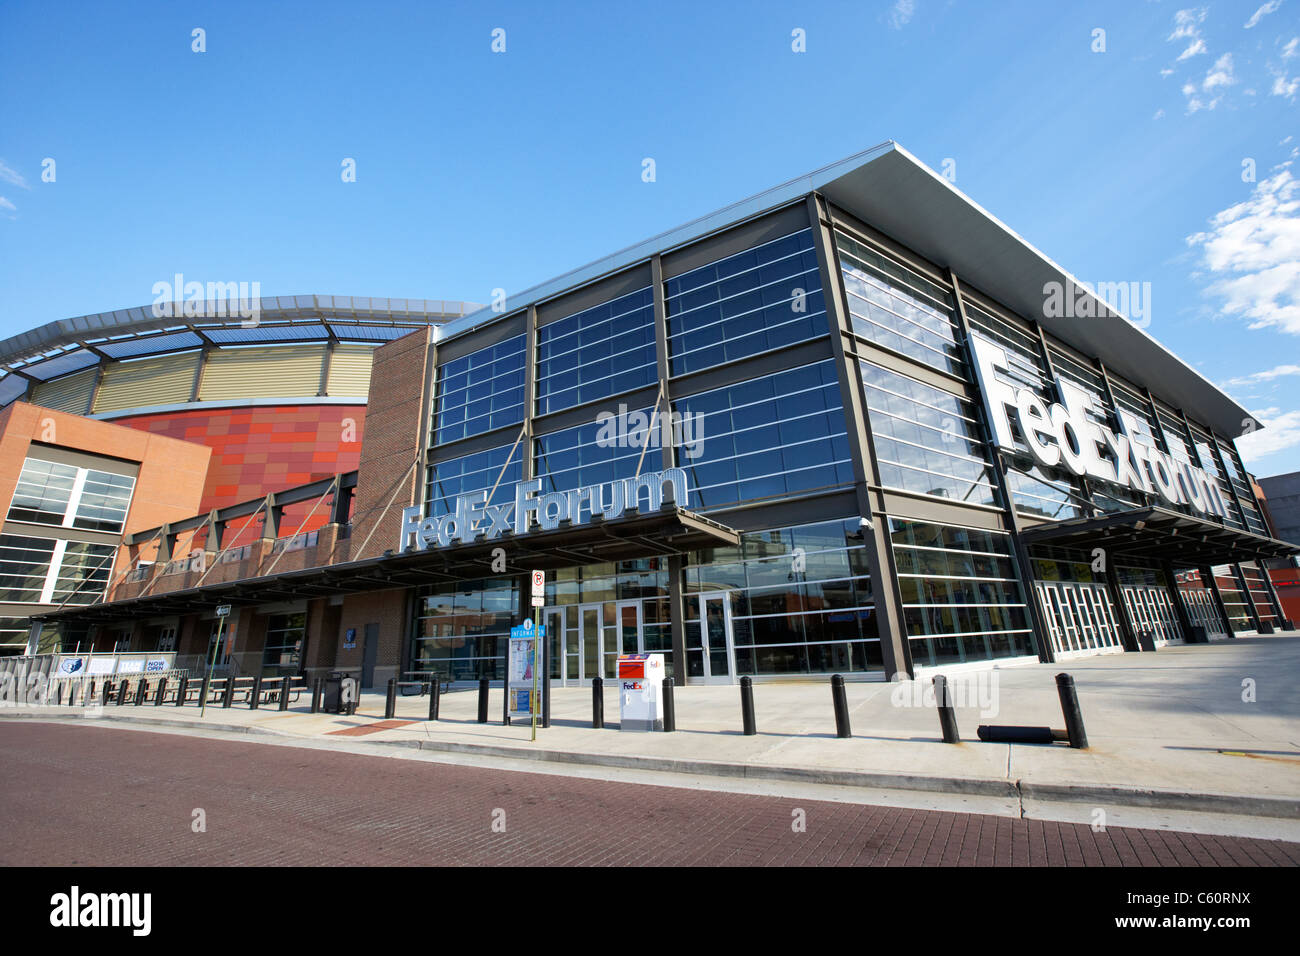 Le fedexforum Memphis Tennessee united states america usa Banque D'Images